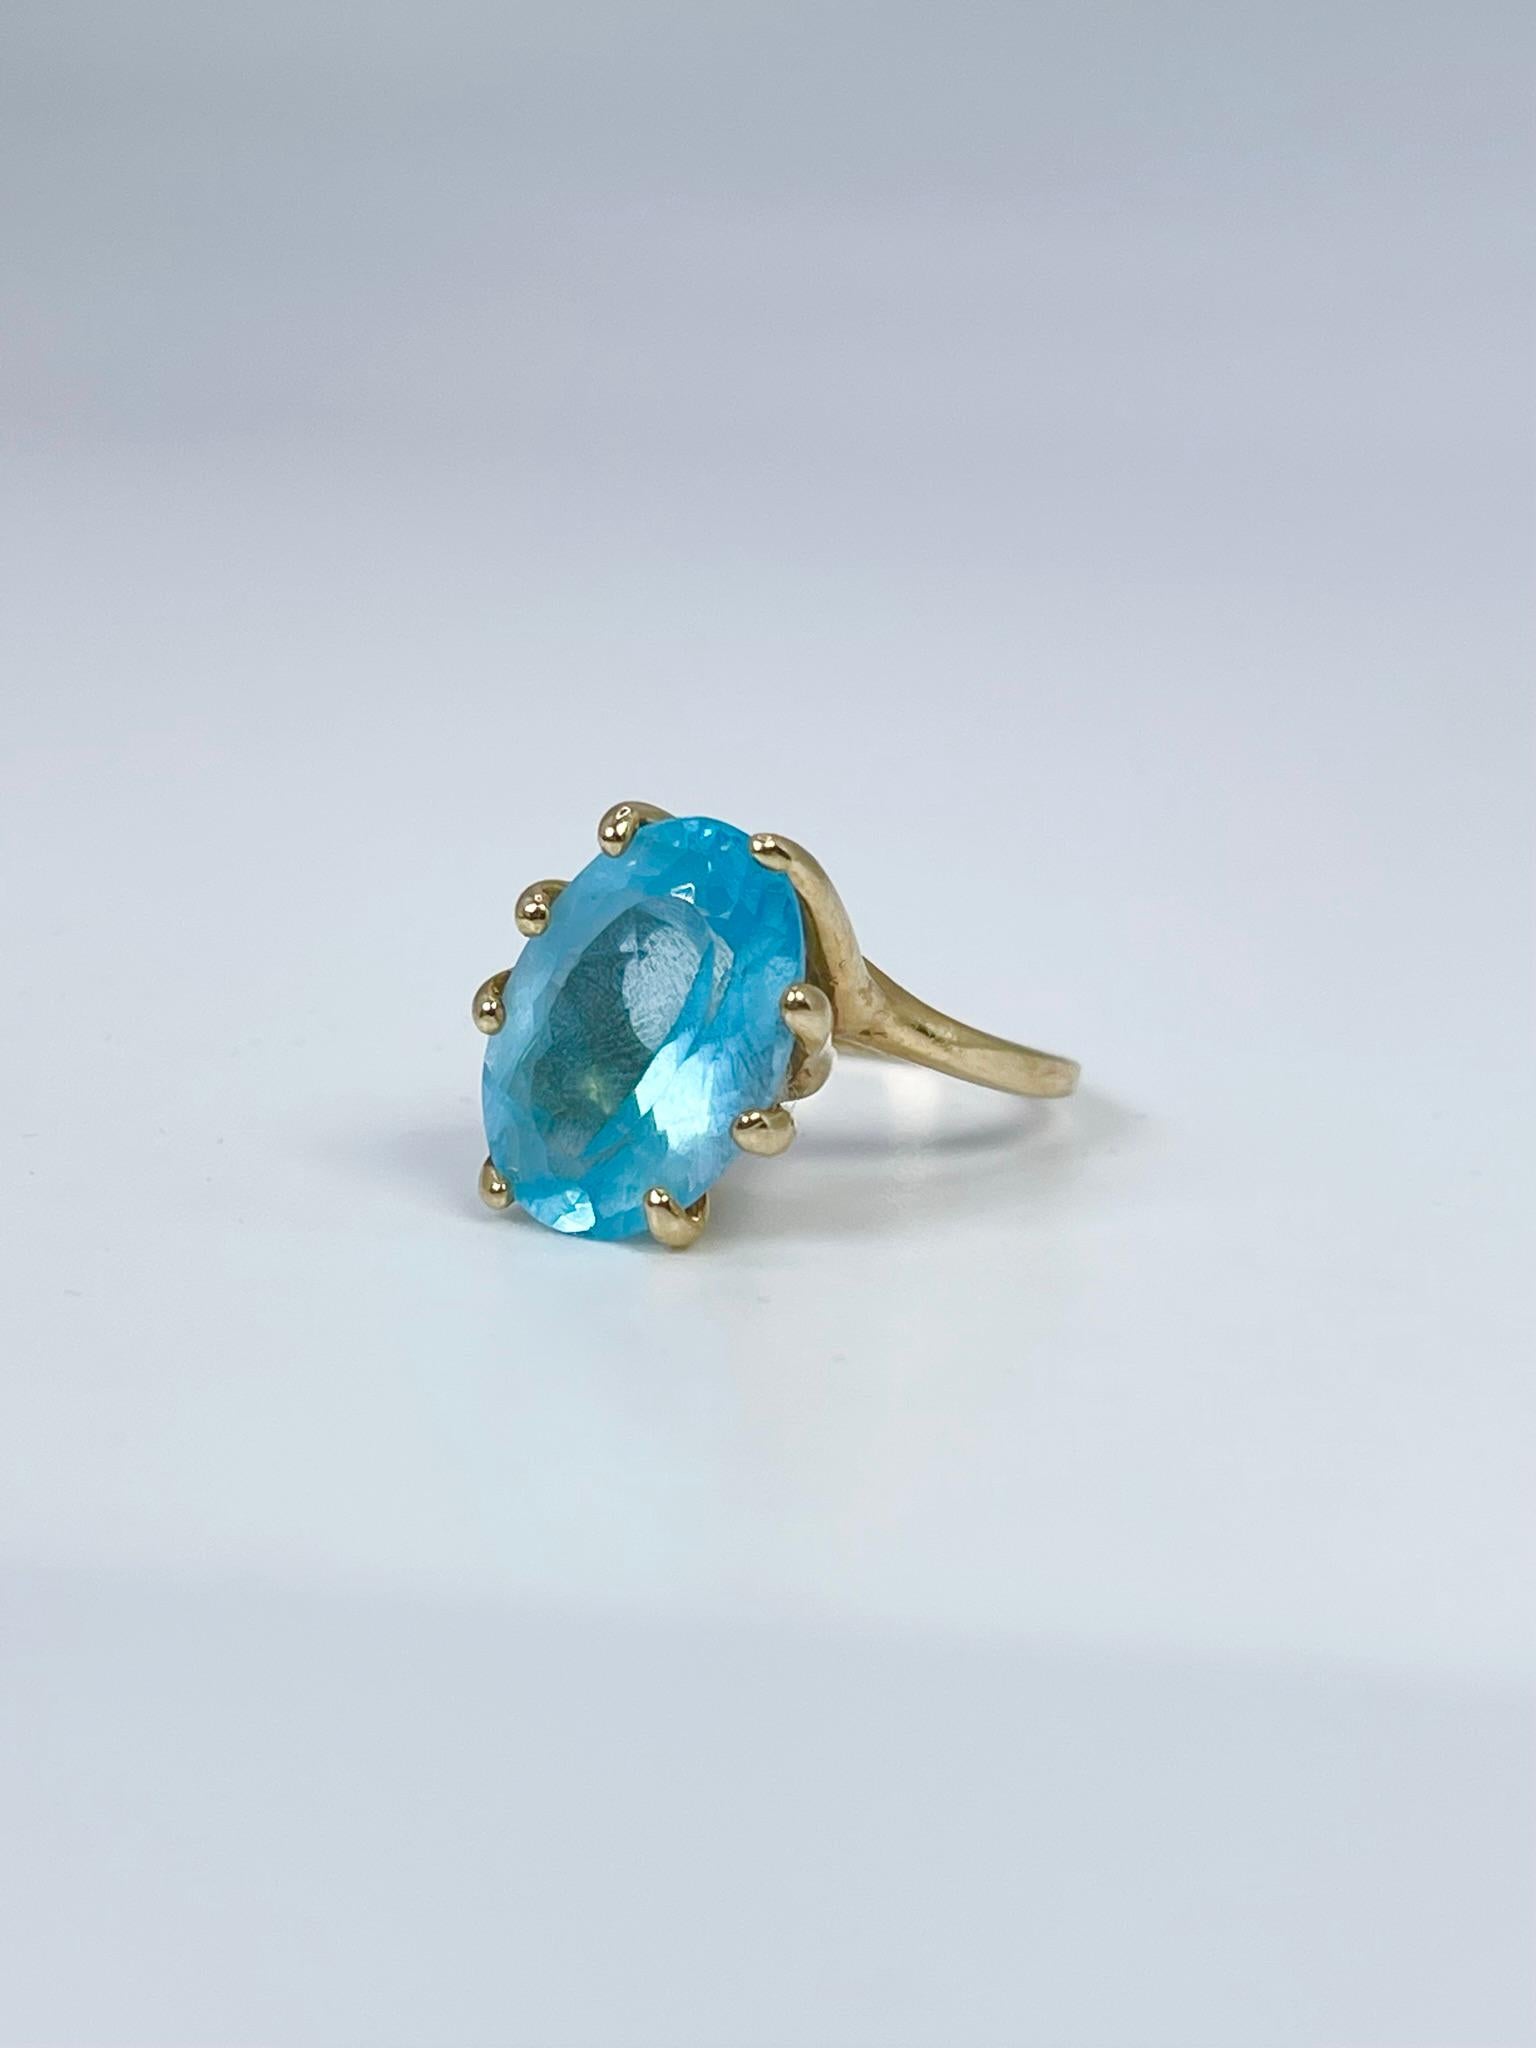 Beautiful unique ring made with blue topaz in 14KT yello gold


GRAM WEIGHT: 5.95gr
GOLD: 14KT yellow gold
GEMSTONE: Natural Topaz 
CLARITY/COLOR: Slightly Included/Blue
CUT: Oval
SIZE: 5.5

WHAT YOU GET AT STAMPAR JEWELERS:
Stampar Jewelers,